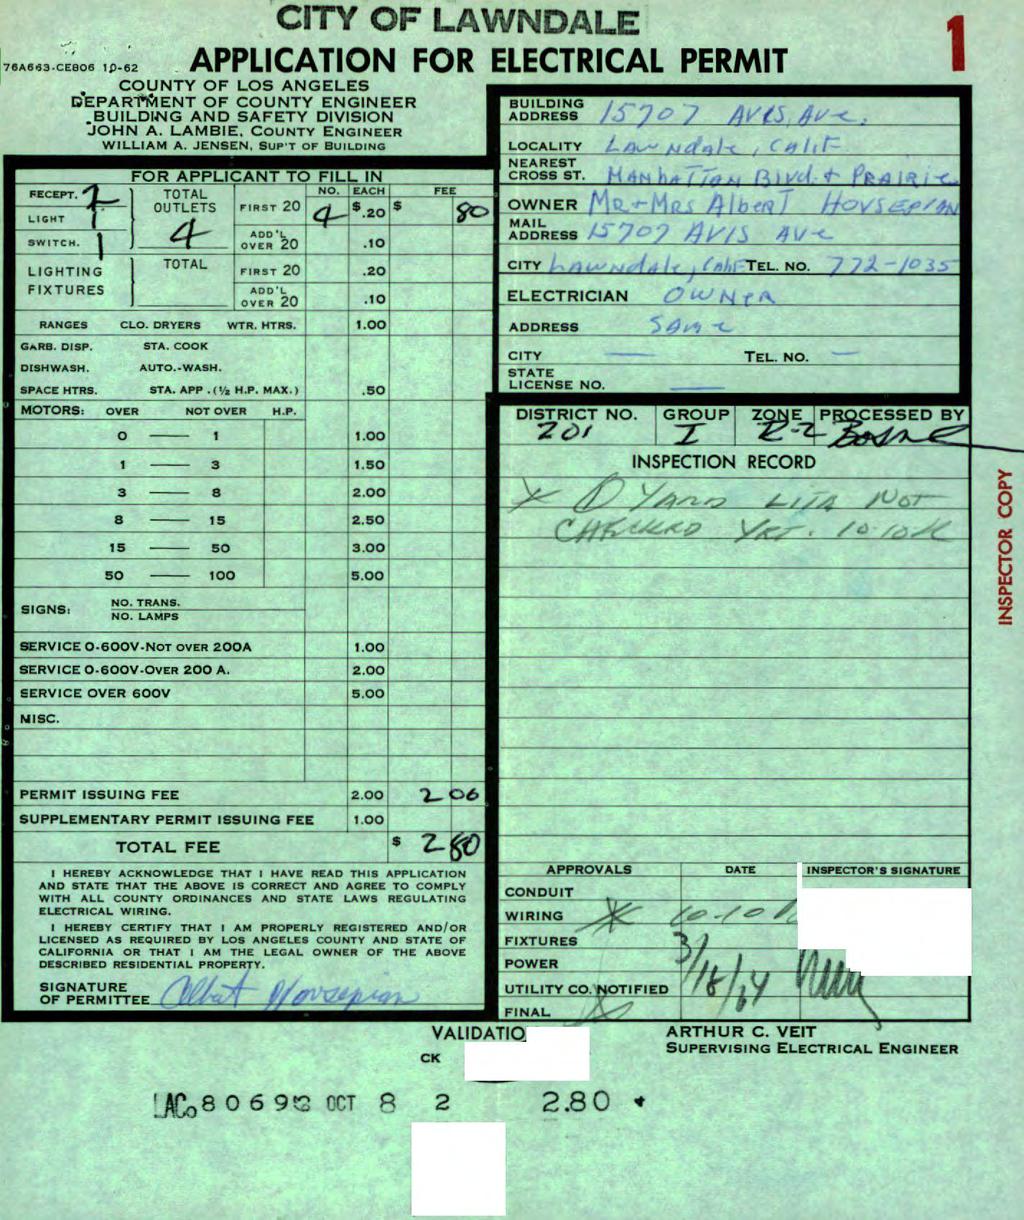 CITY OF LAWNDALE,...,3 APPLICATION FOR ELECTRICAL PERMIT COUNTY OF LOS ANGELES DEPARTTvIENT OF COUNTY ENGINEER _ BUILDING AND SAFETY DIVISION / y «- /i* /fy LIGHTING FIXTURES flances OaRB.